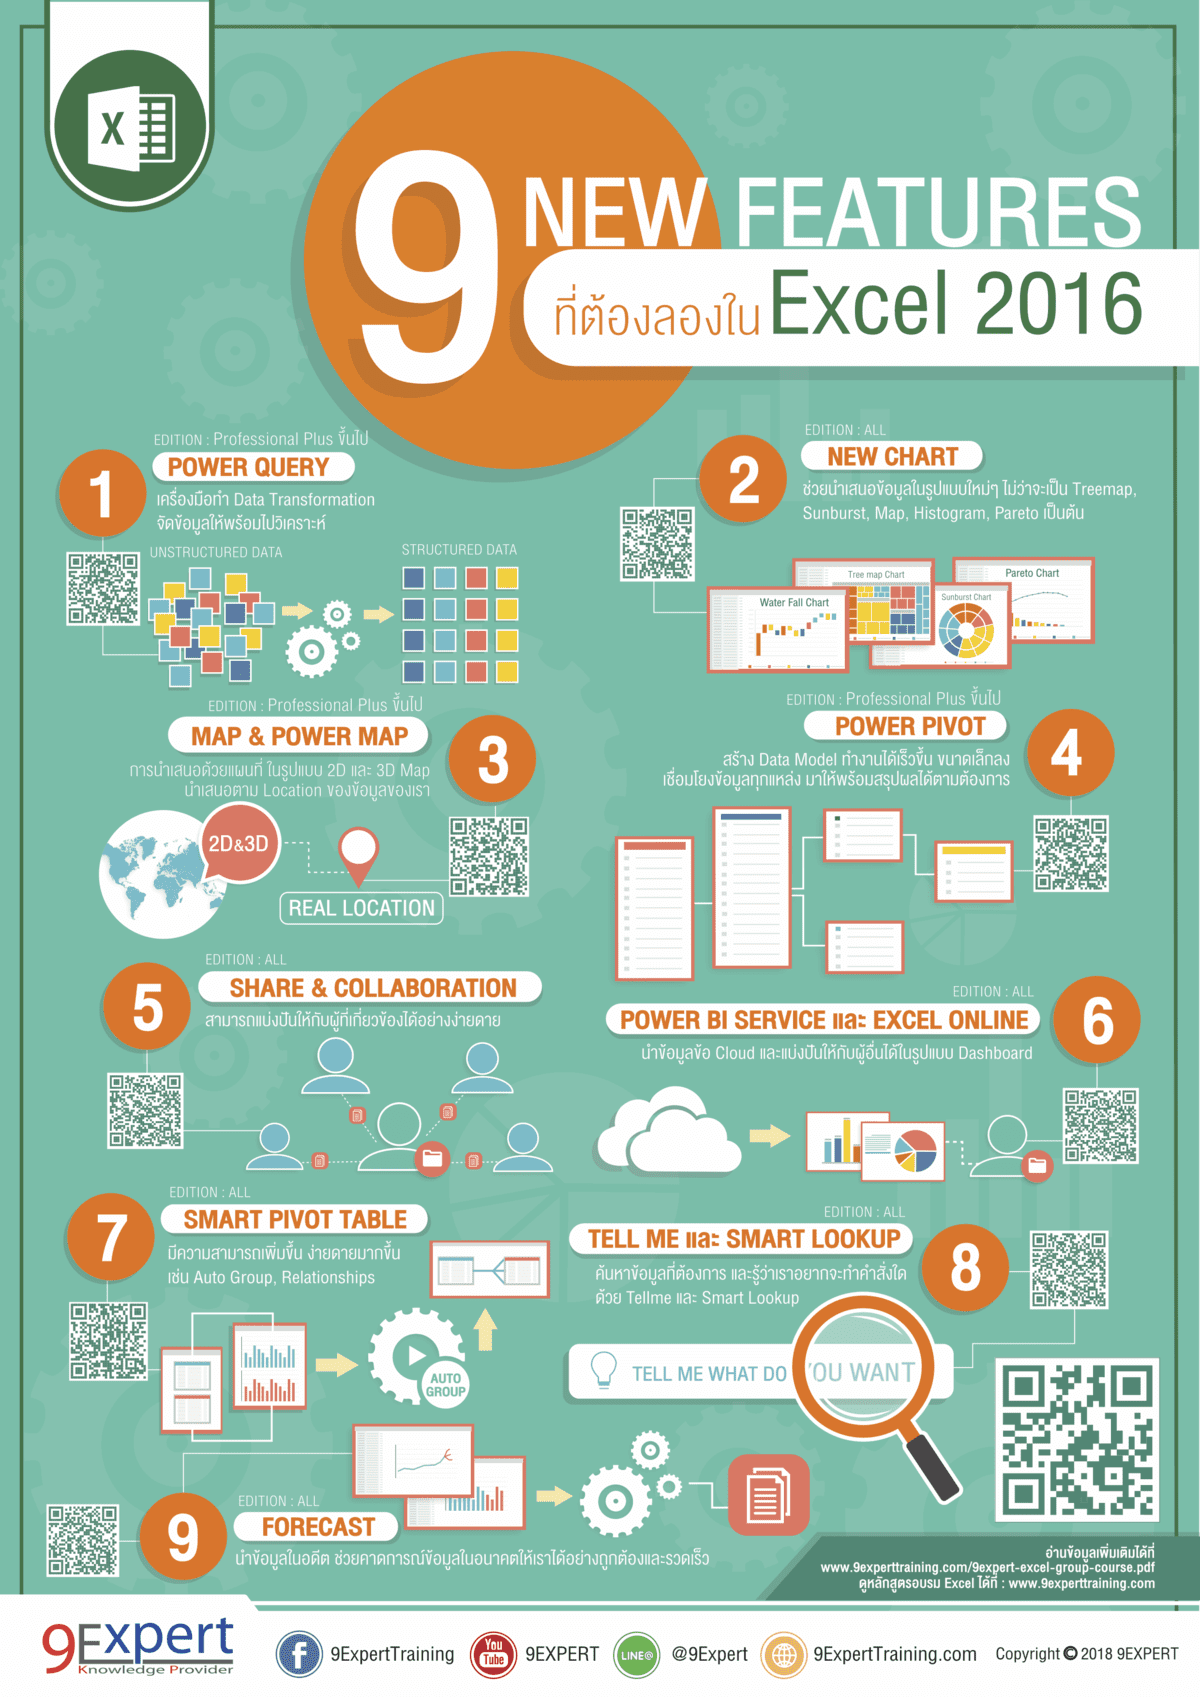 Most Used Shortcut Keys in Microsoft Excel - Infographics